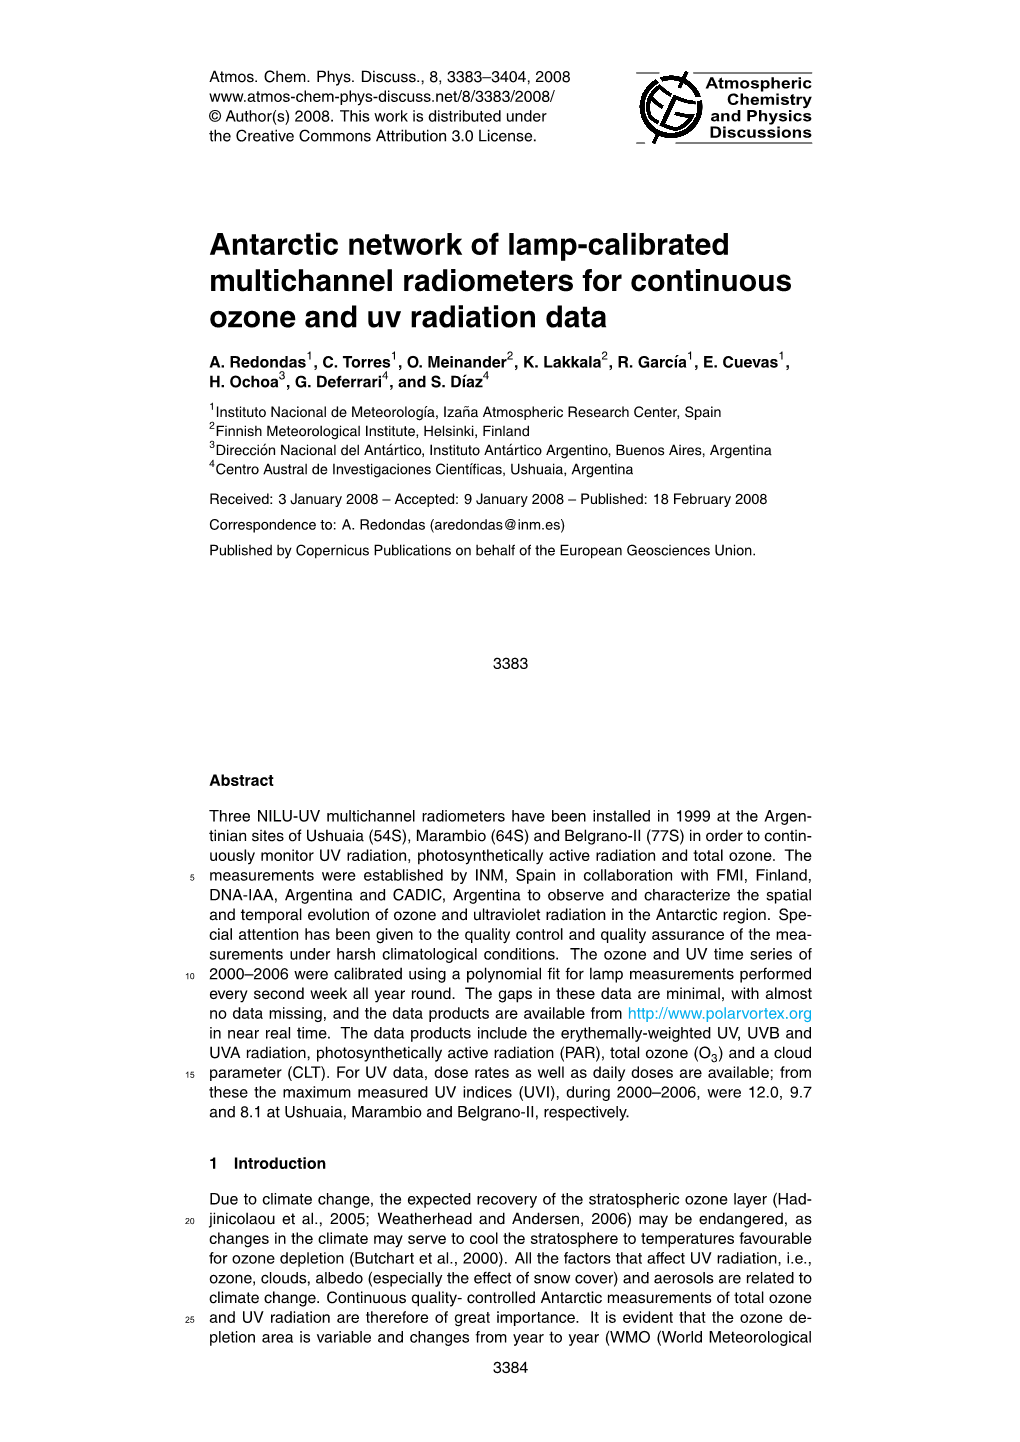 Antarctic Network of Lamp-Calibrated Multichannel Radiometers for Continuous Ozone and Uv Radiation Data